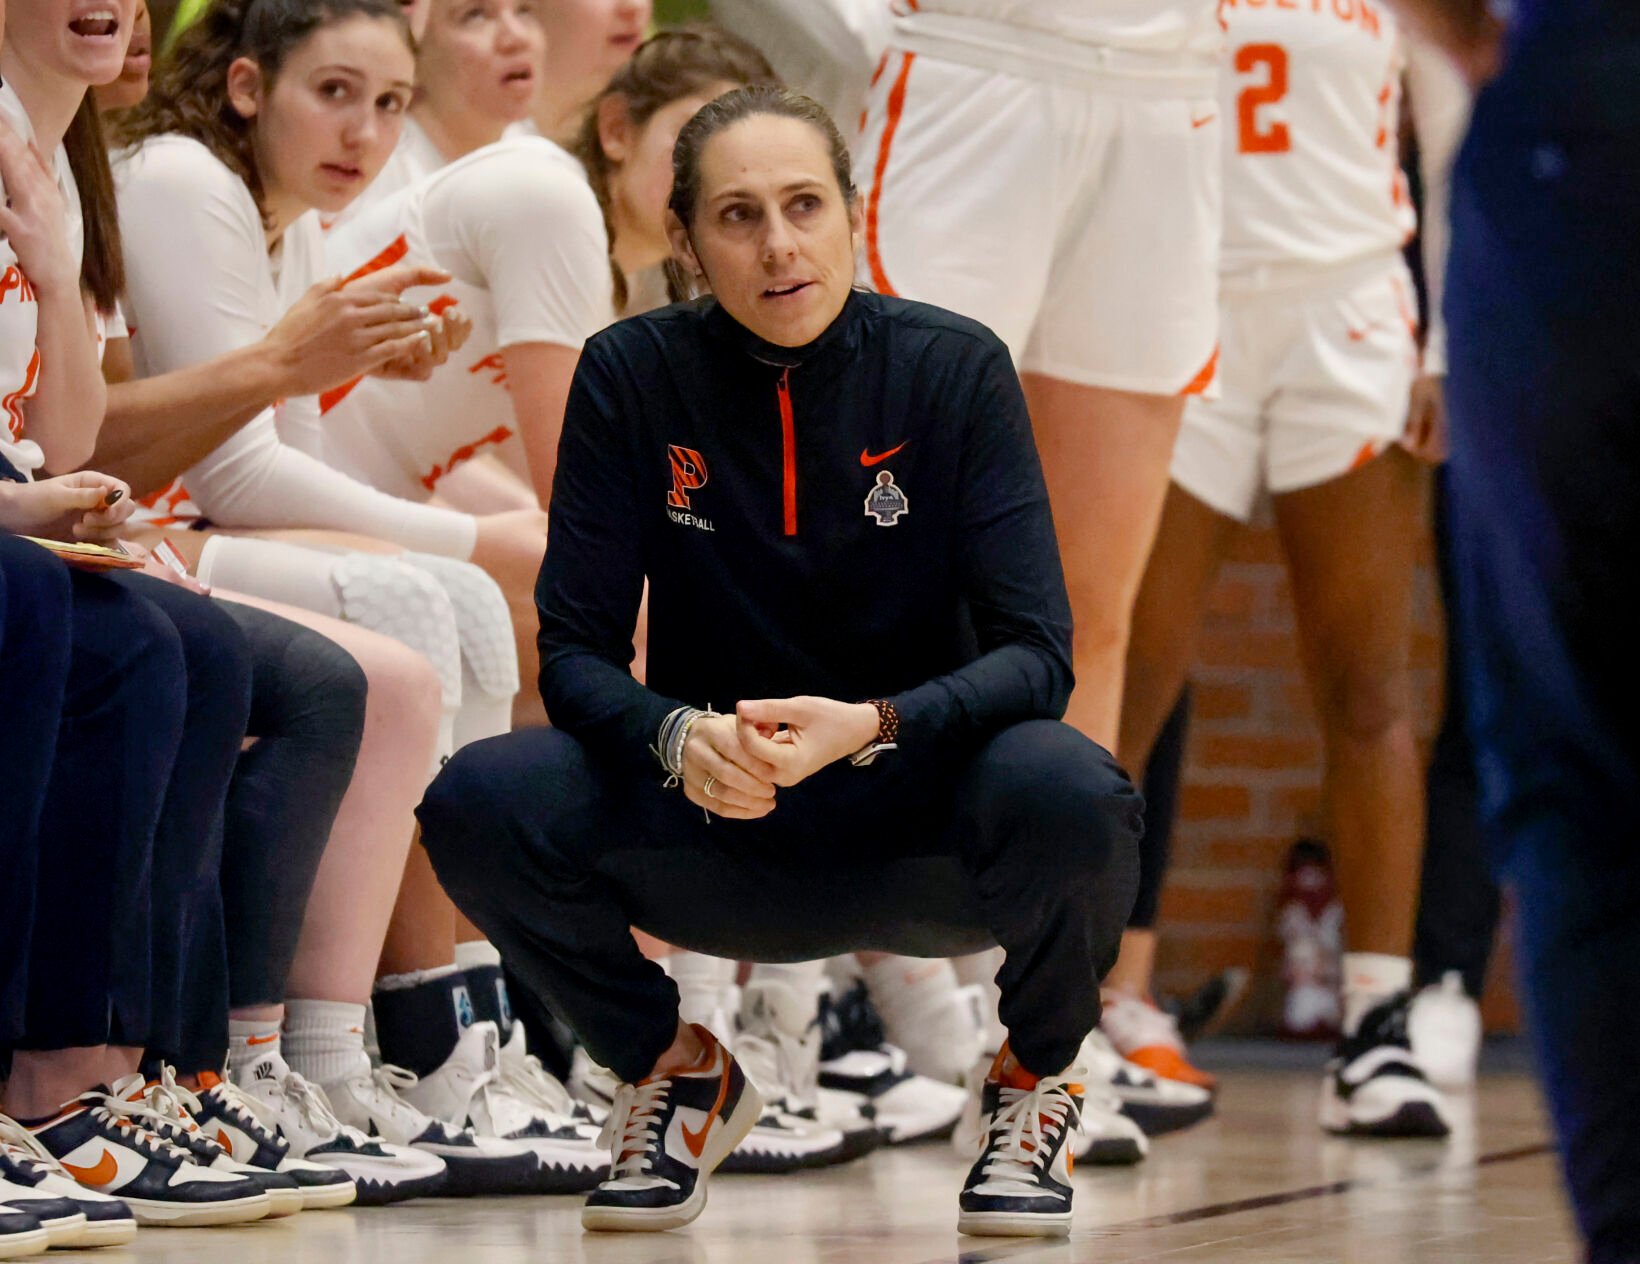 Princeton Tigers women’s basketball on a winning streak after tough nonconference schedule